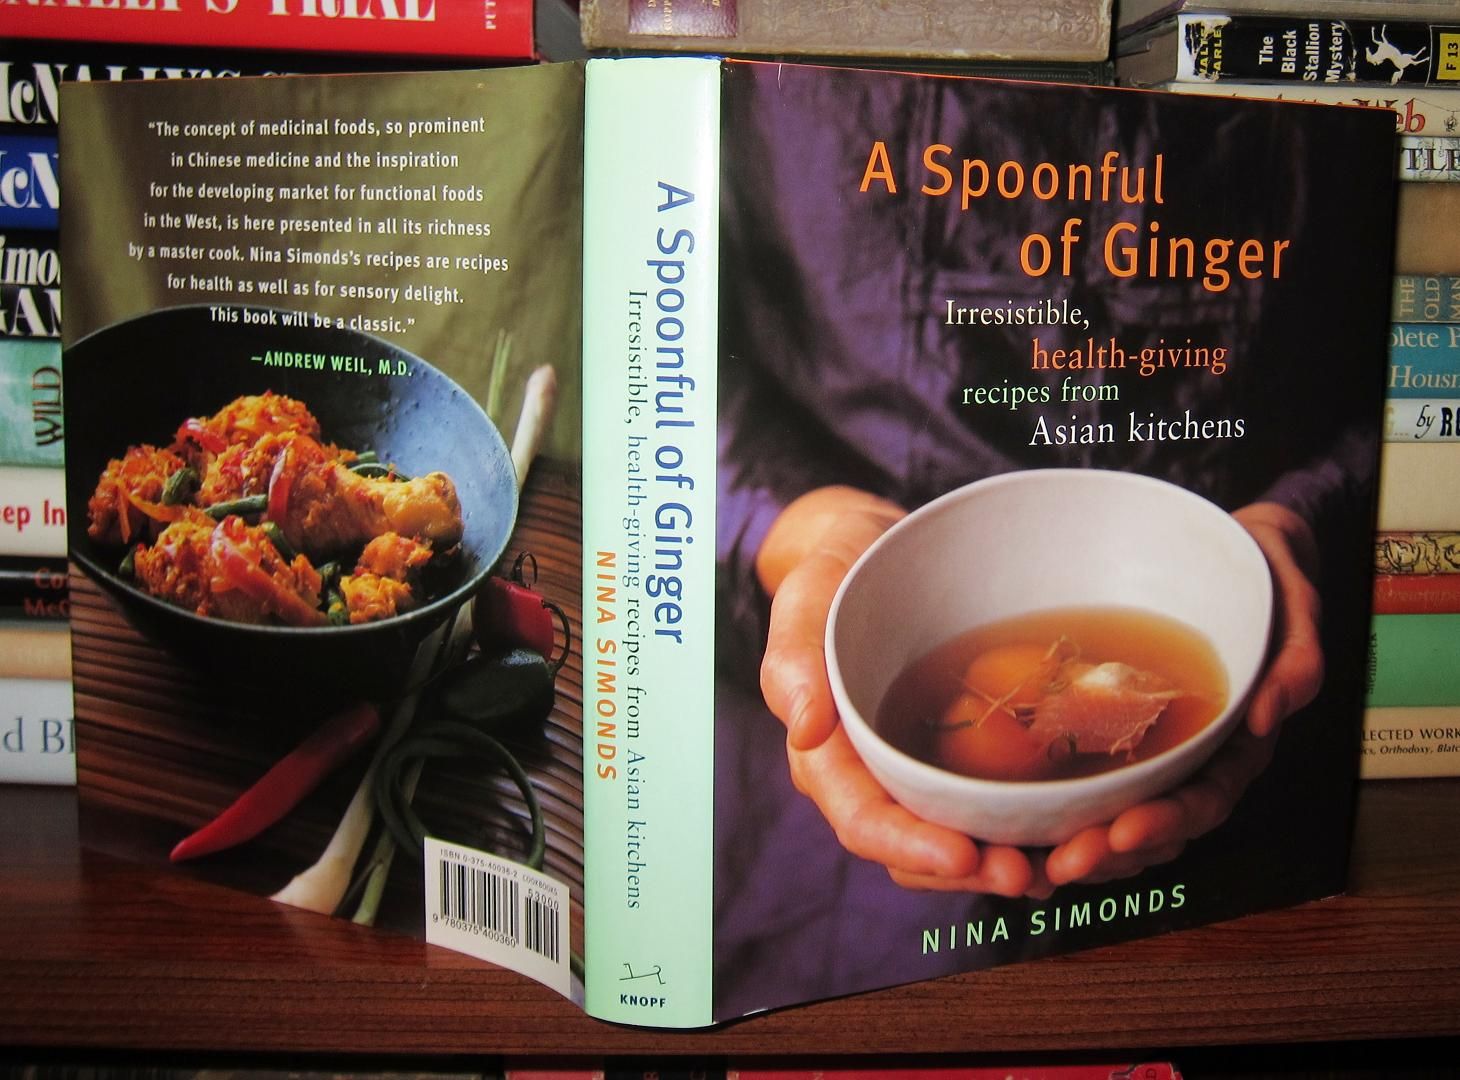 SIMONDS, NINA - A Spoonful of Ginger Irresistible Health-Giving Recipes from Asian Kitchens